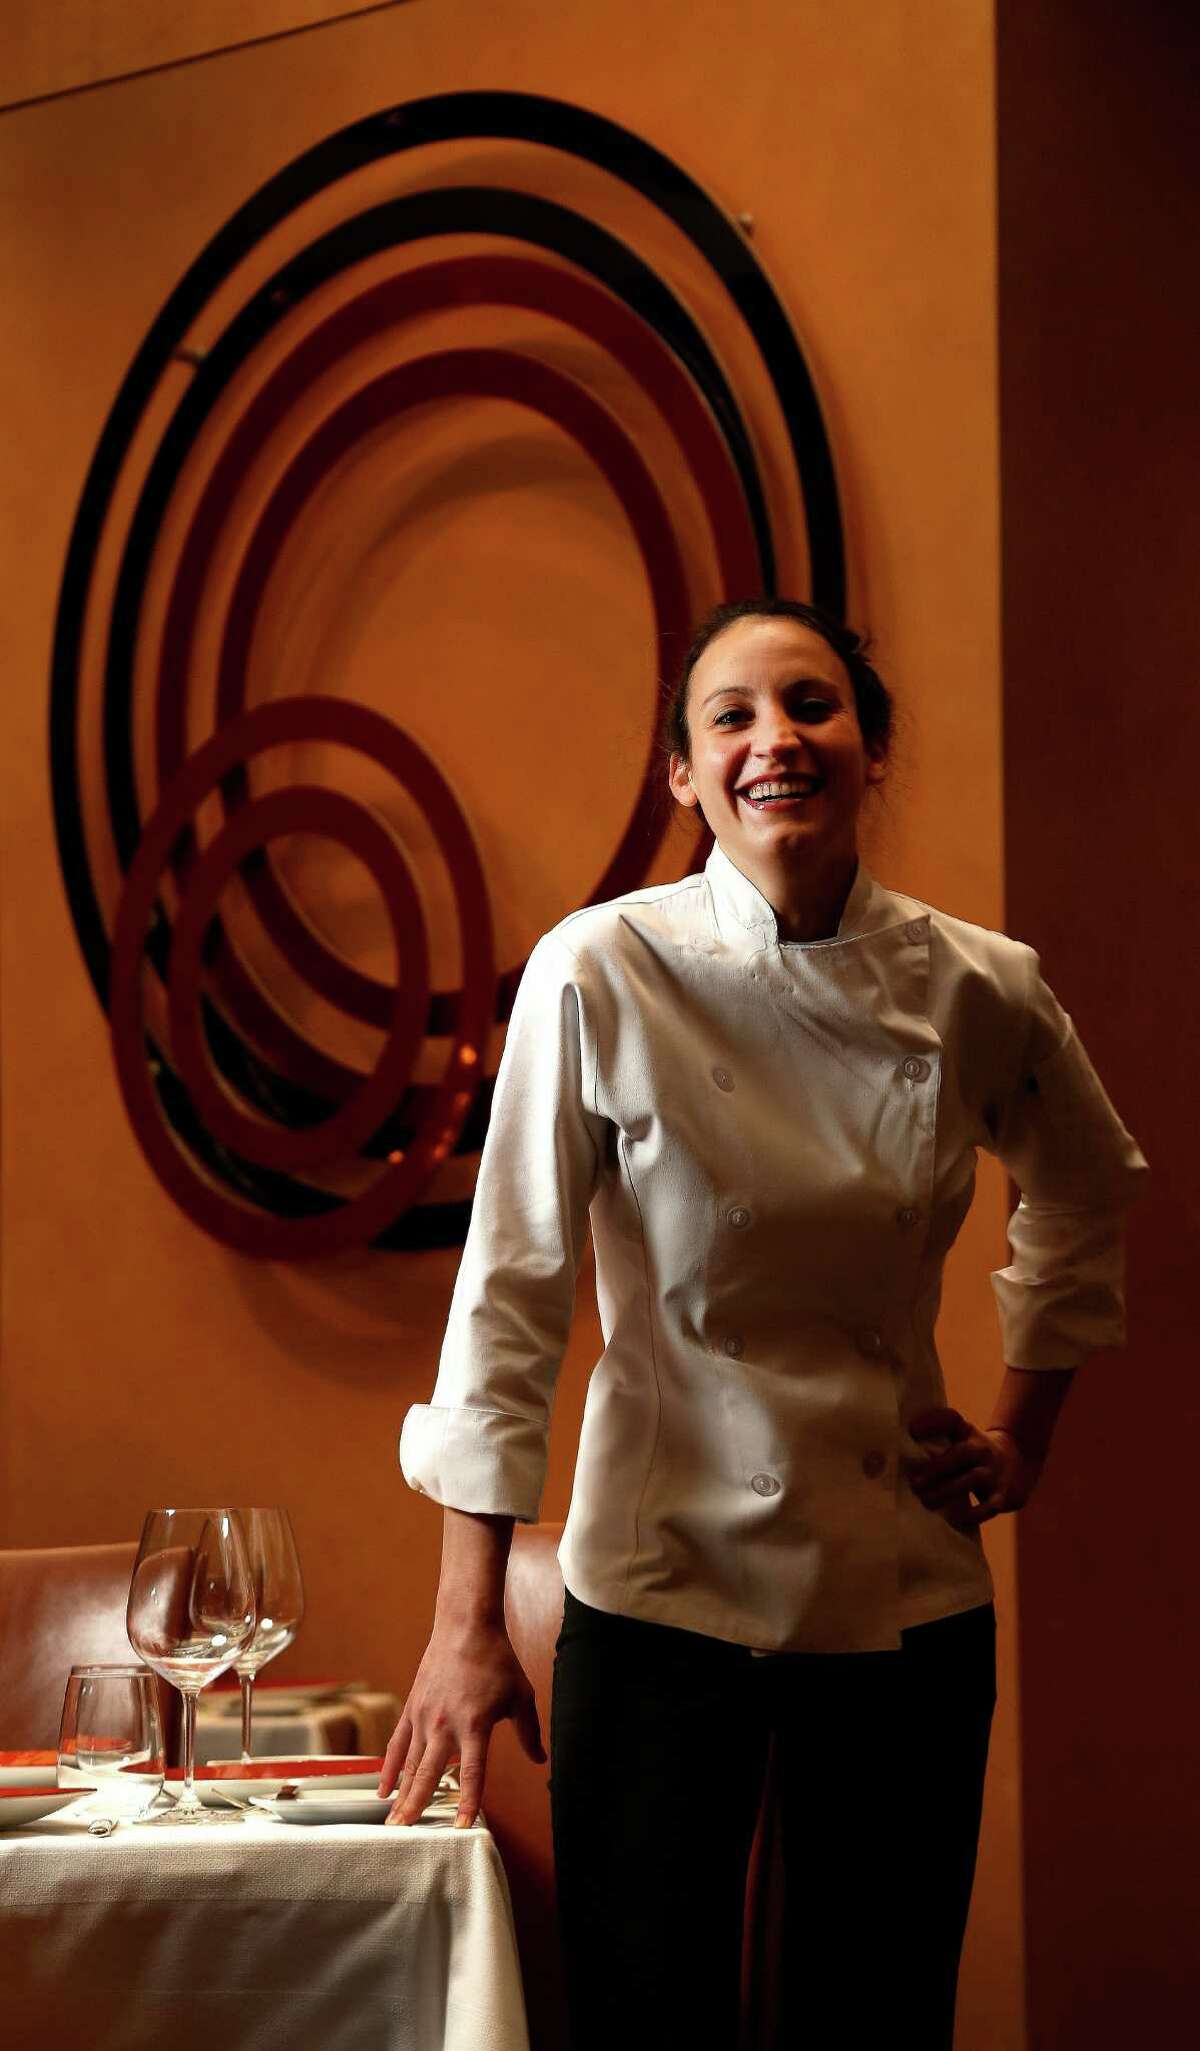 Kate McLean is the new chef de cuisine at Tony's restaurant, a fine dining institution in Houston. She follows Grant Gordon, who is opening Vallone's steakhouse this month.